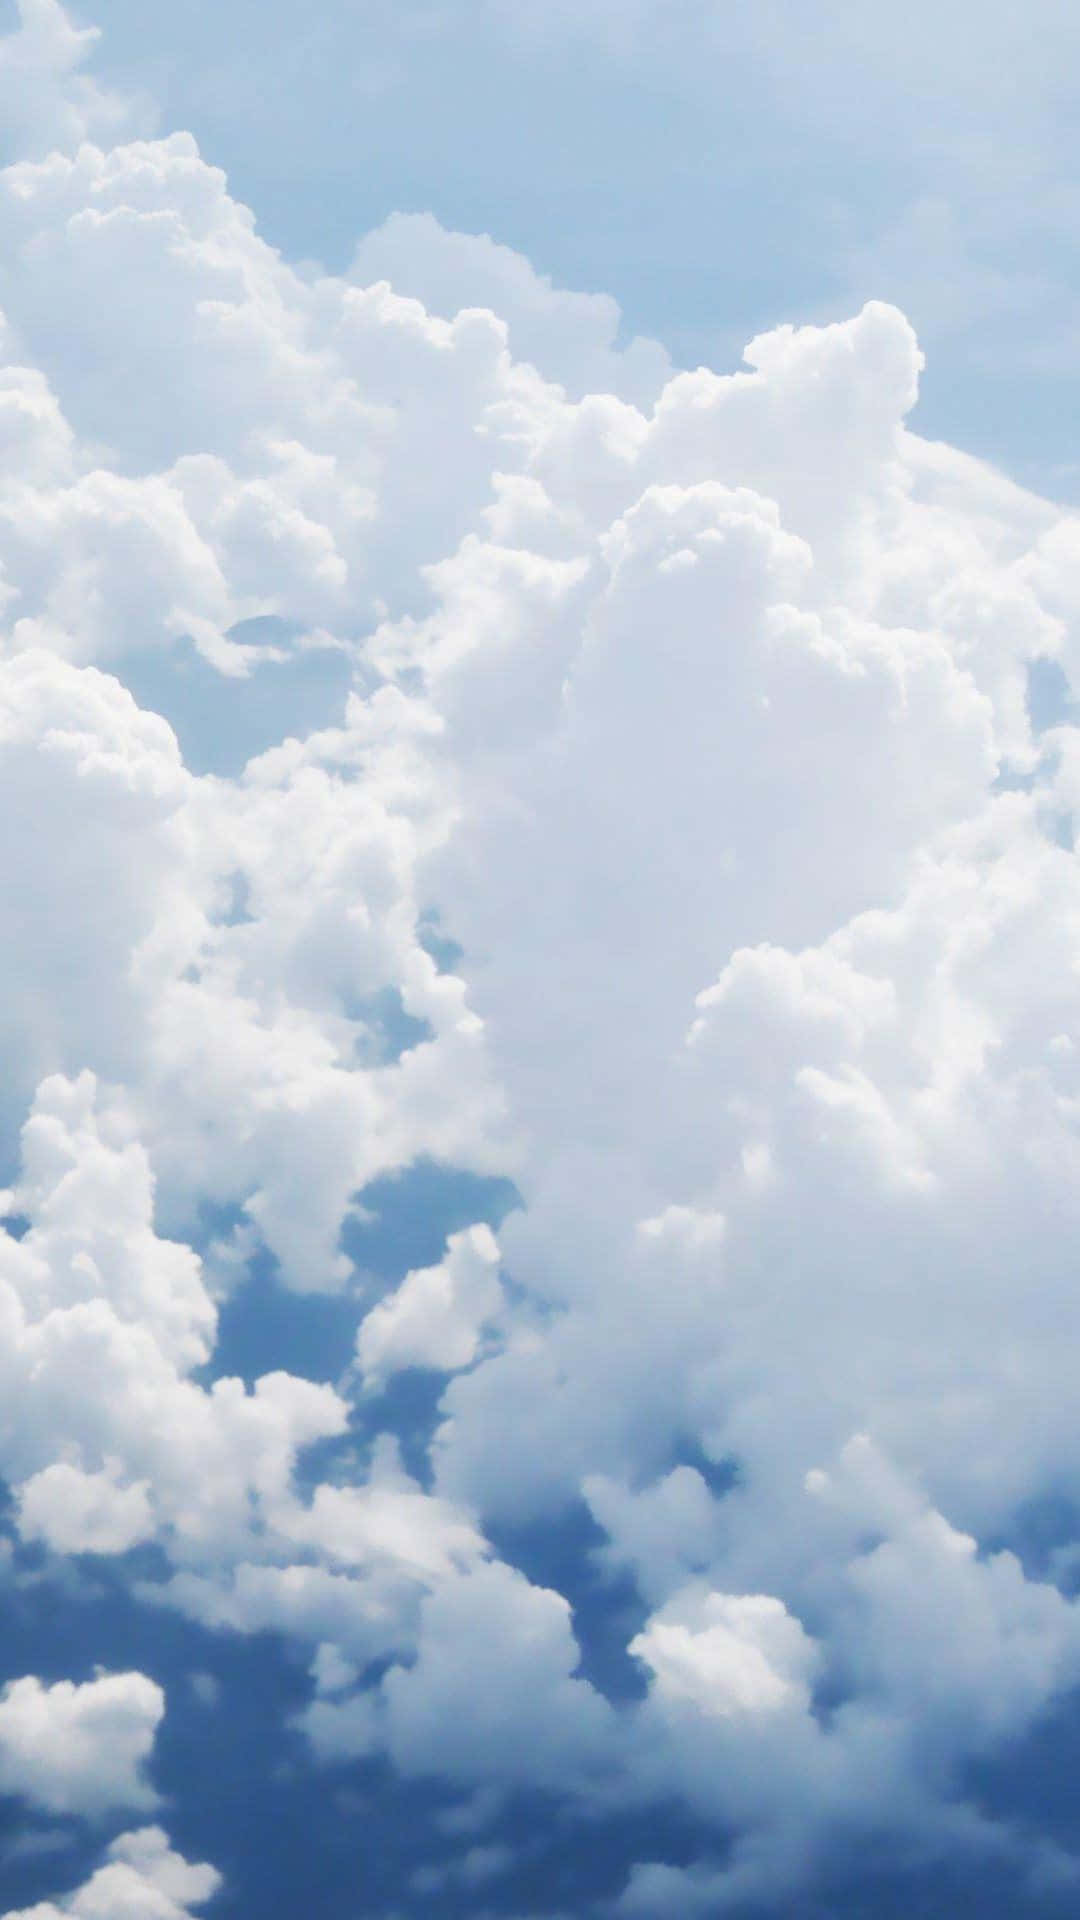 A beautiful view of the sky with white fluffy clouds Wallpaper